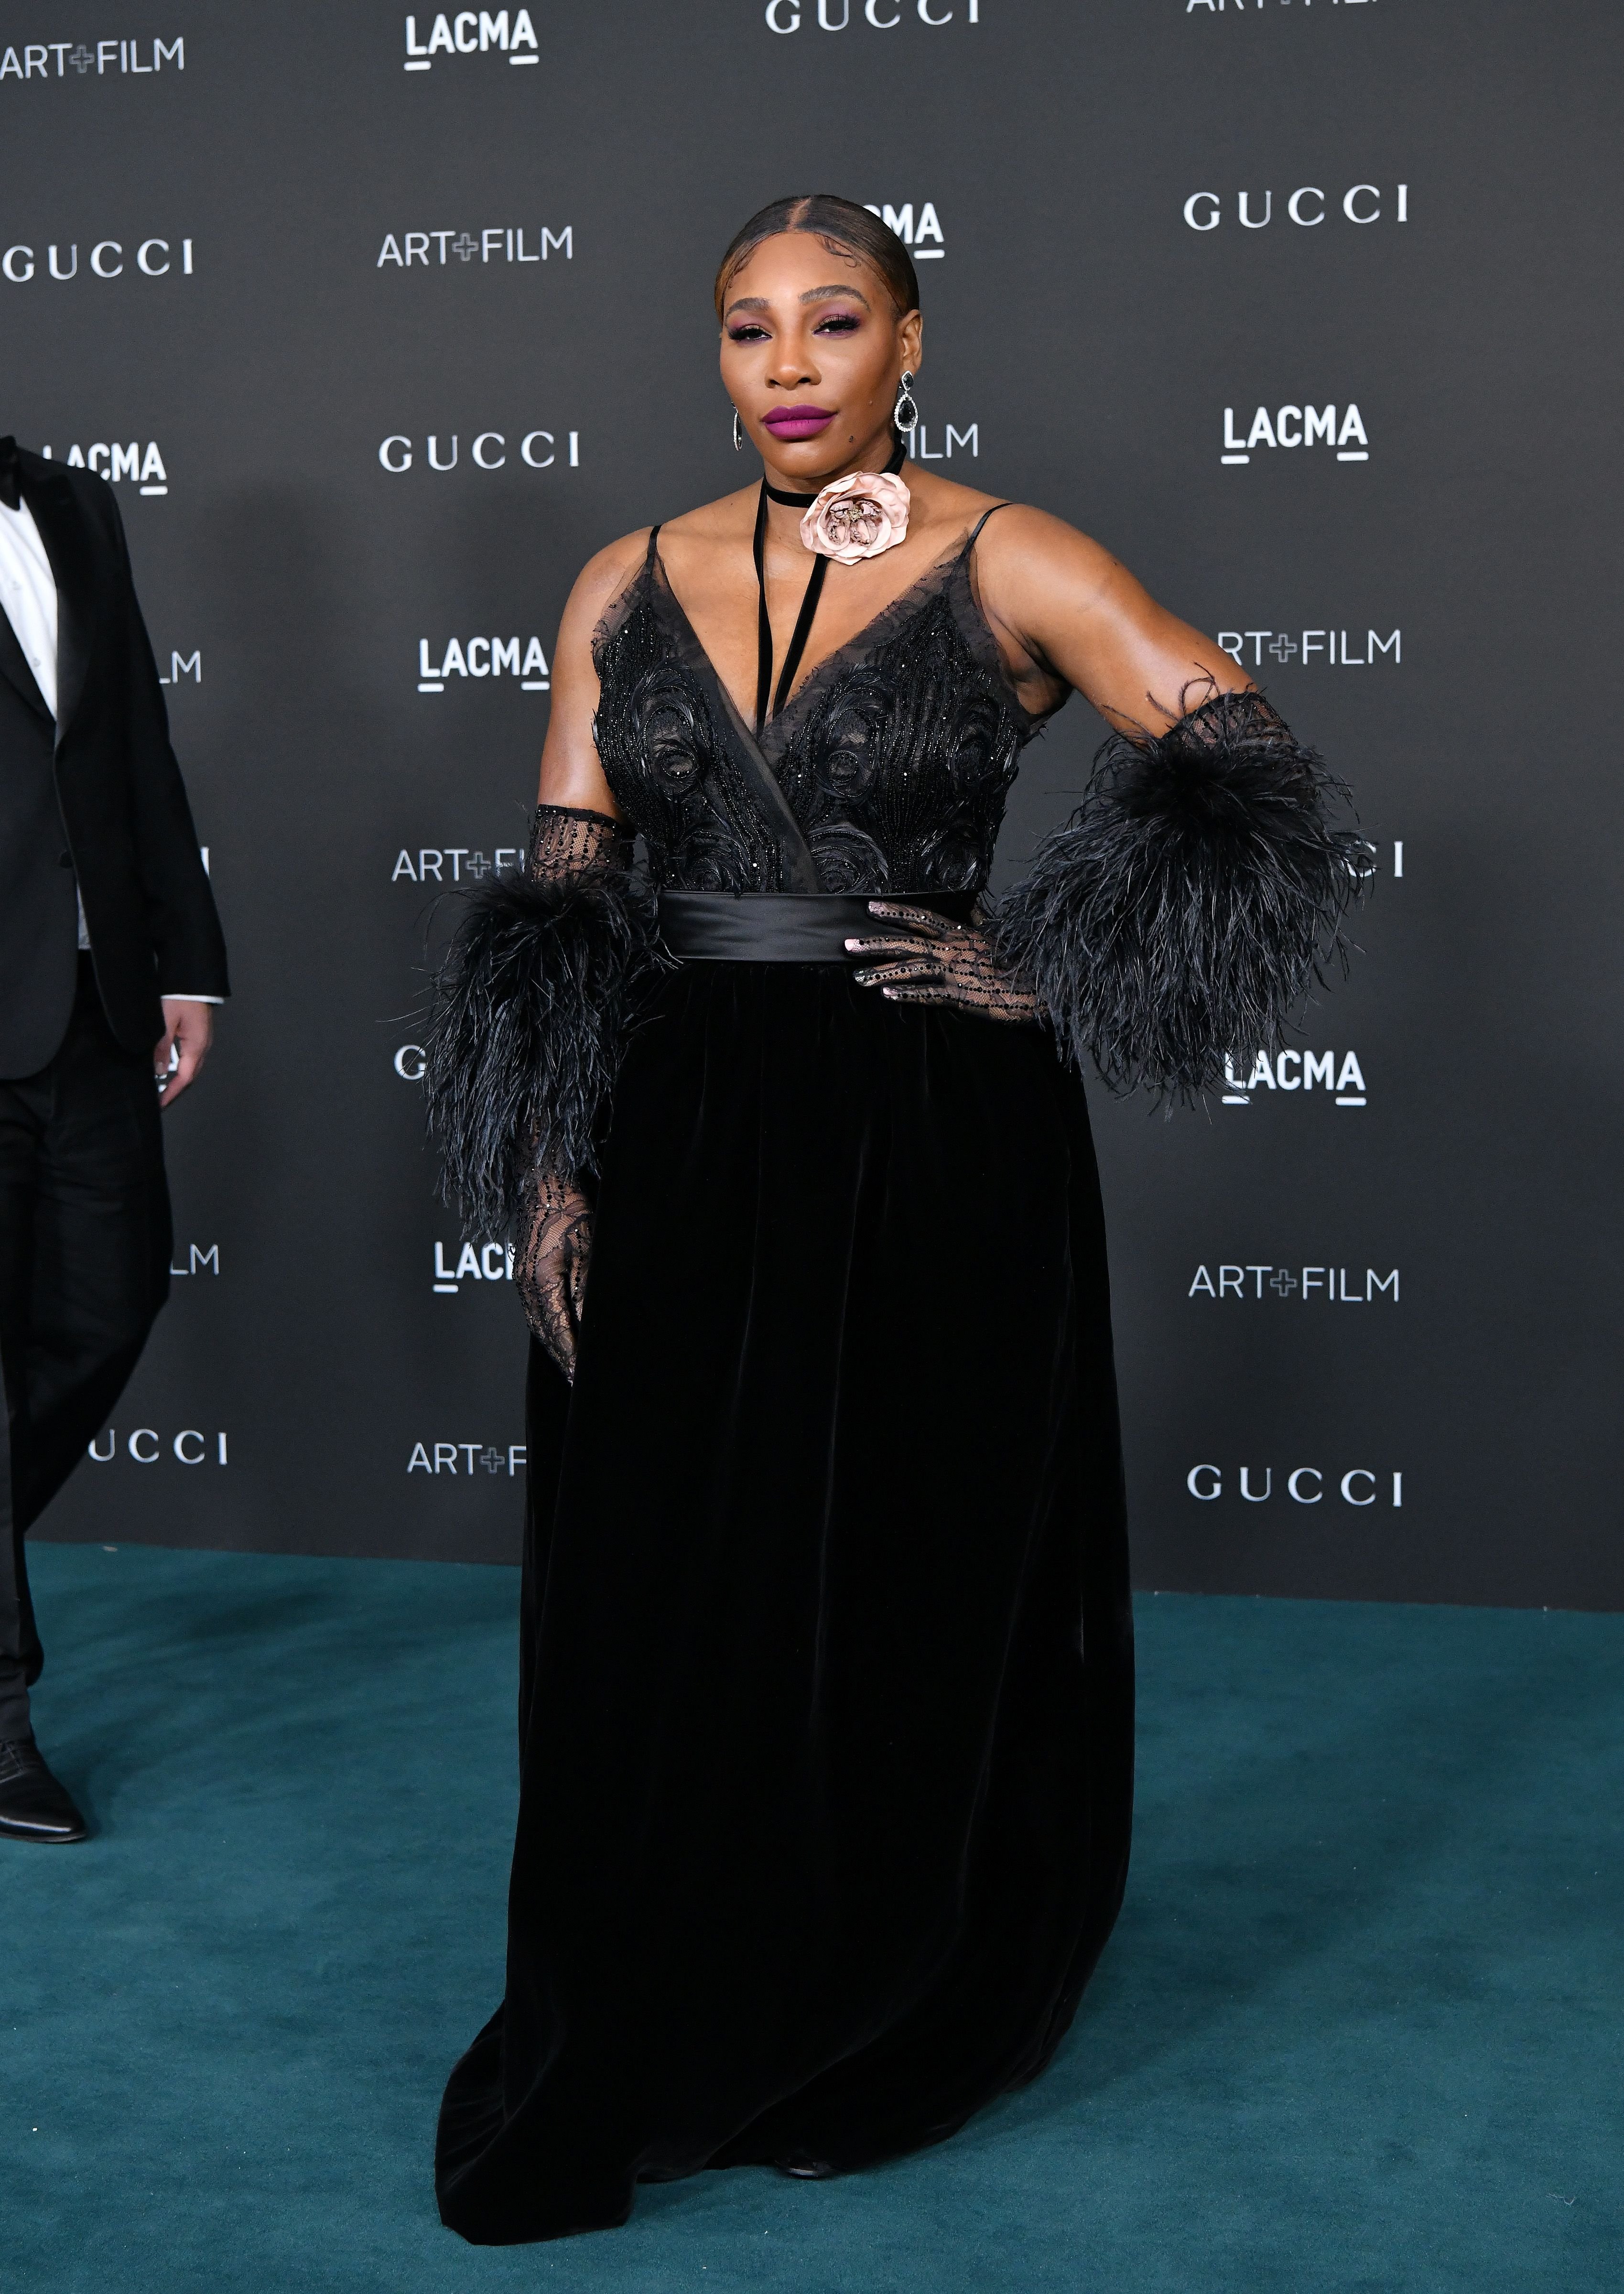 Serena Williams at the 10th Annual LACMA Art+Film Gala on November 6, 2021, in Los Angeles, California. | Source: Axelle/Bauer-Griffin/FilmMagic/Getty Images